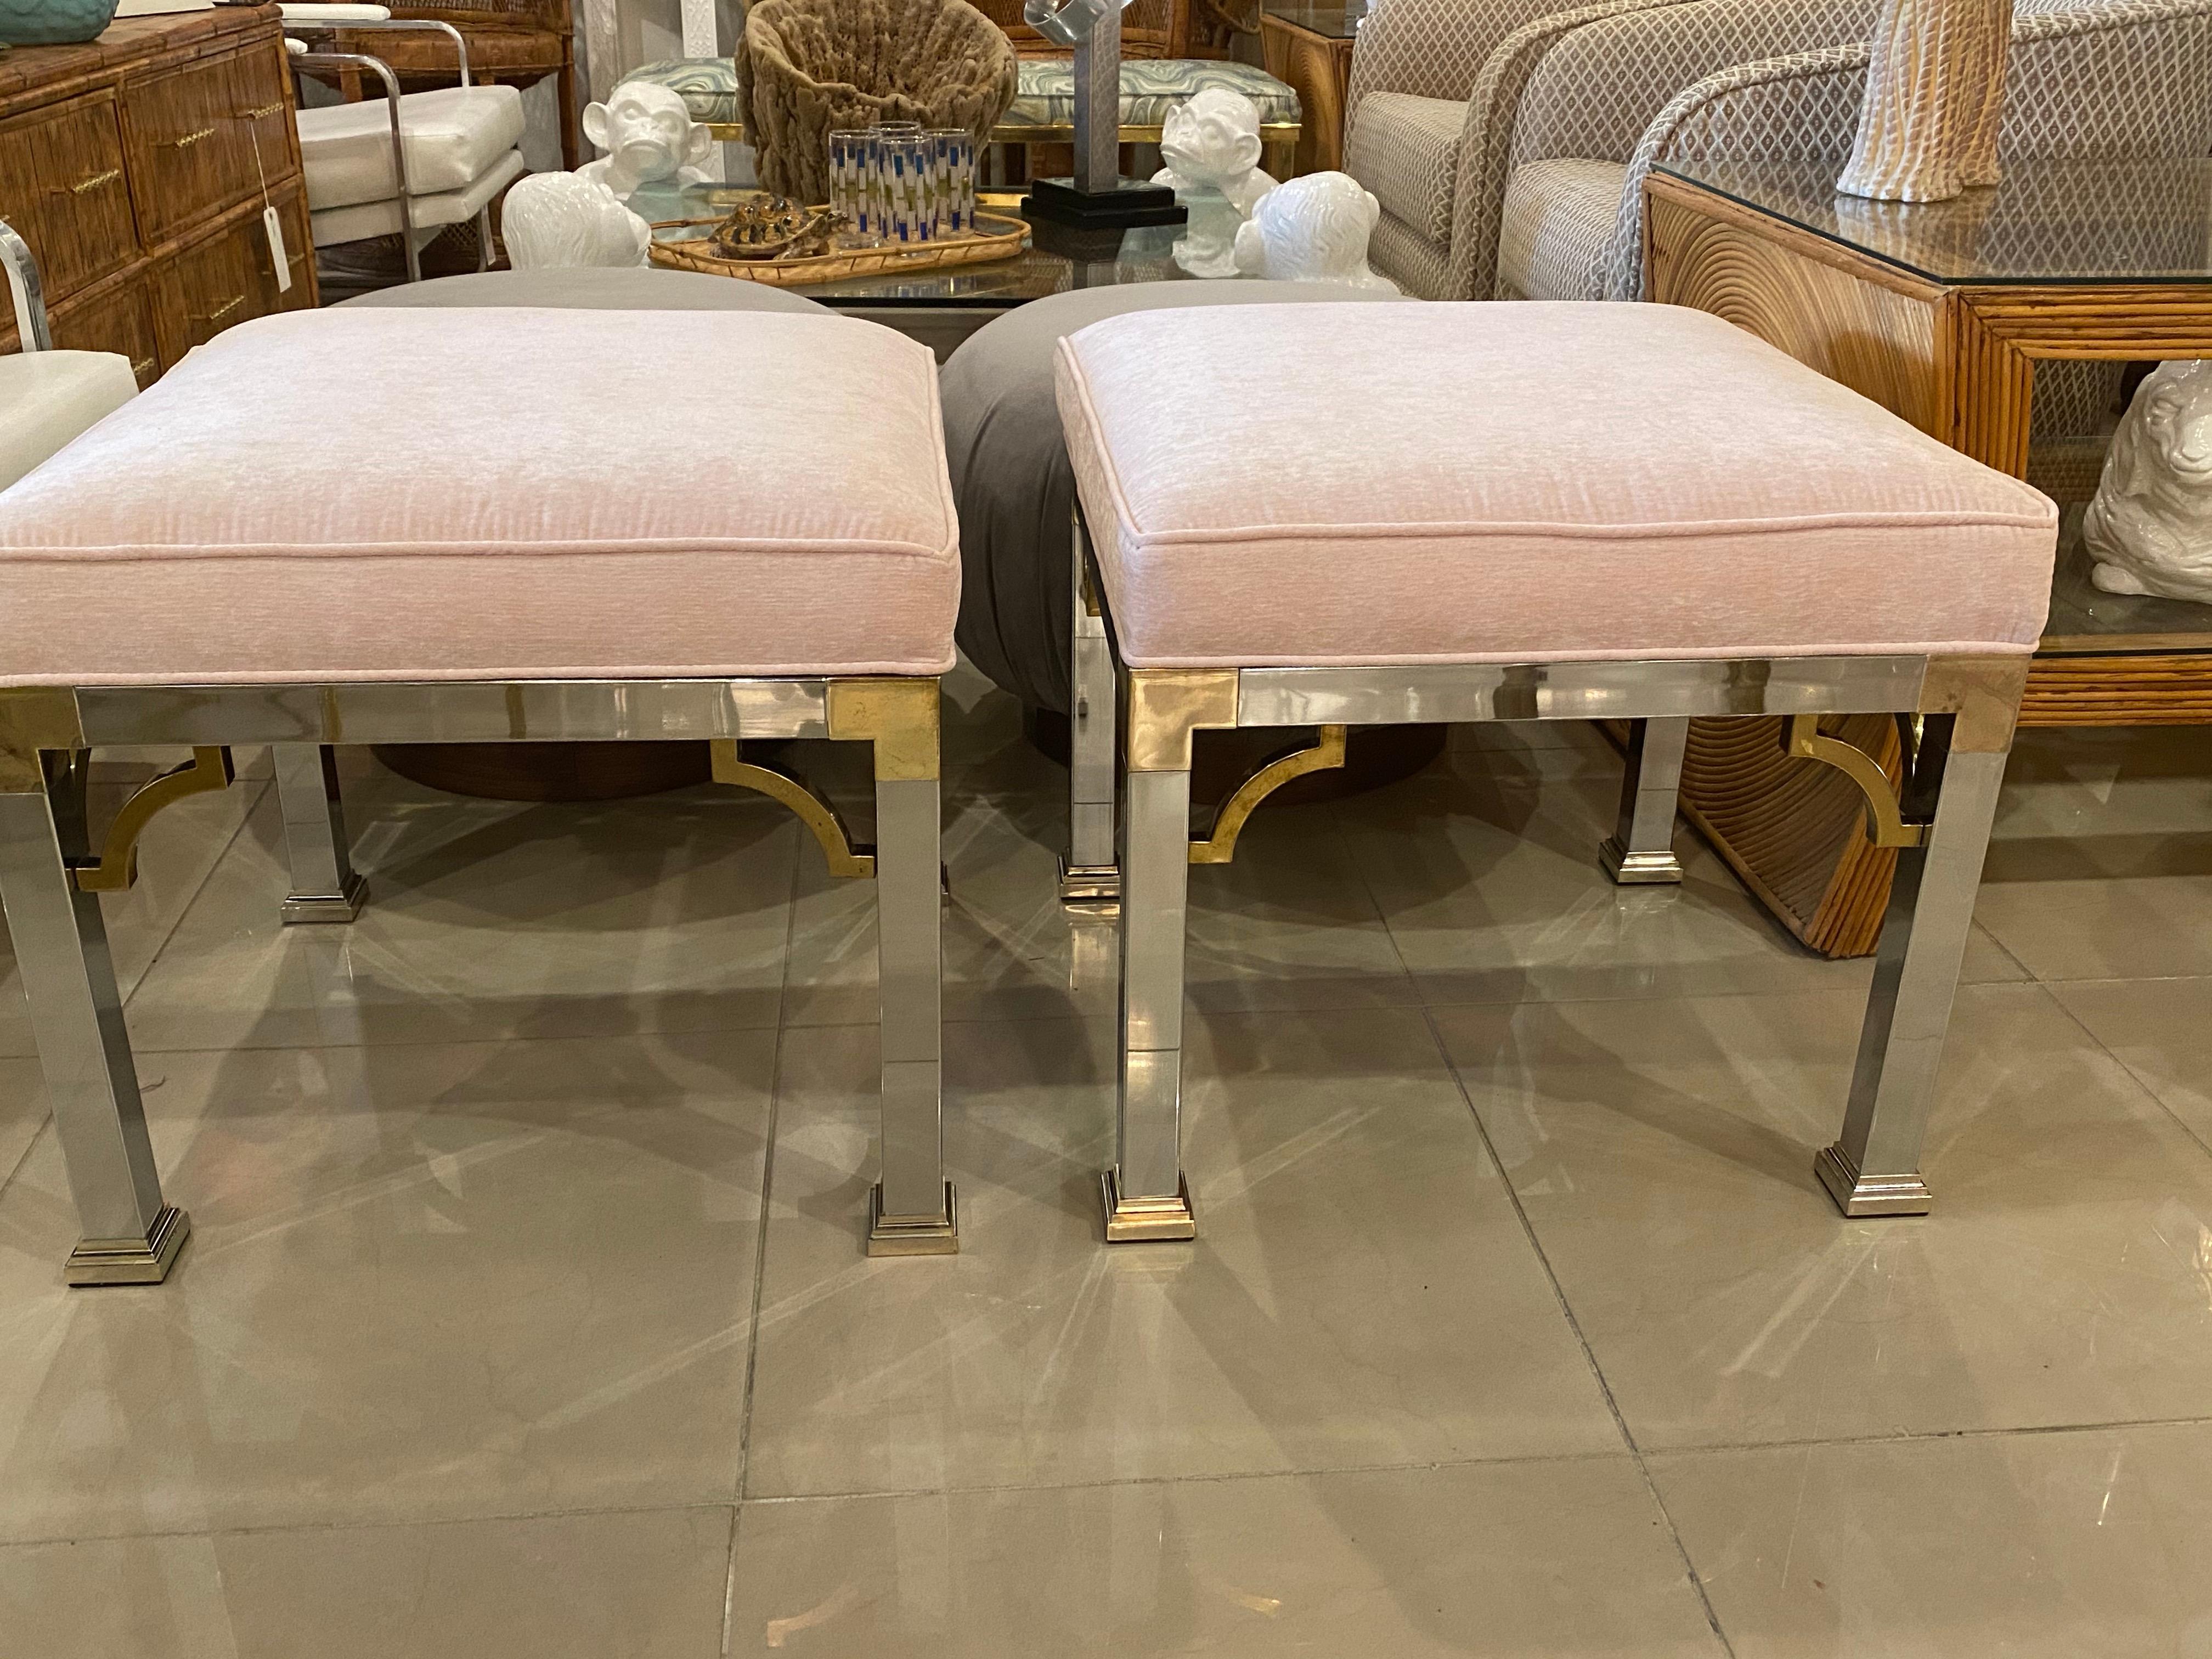 Hollywood Regency Vintage Pair of Chrome and Brass Upholstered Pink Velvet Benches Stools Ottomans For Sale